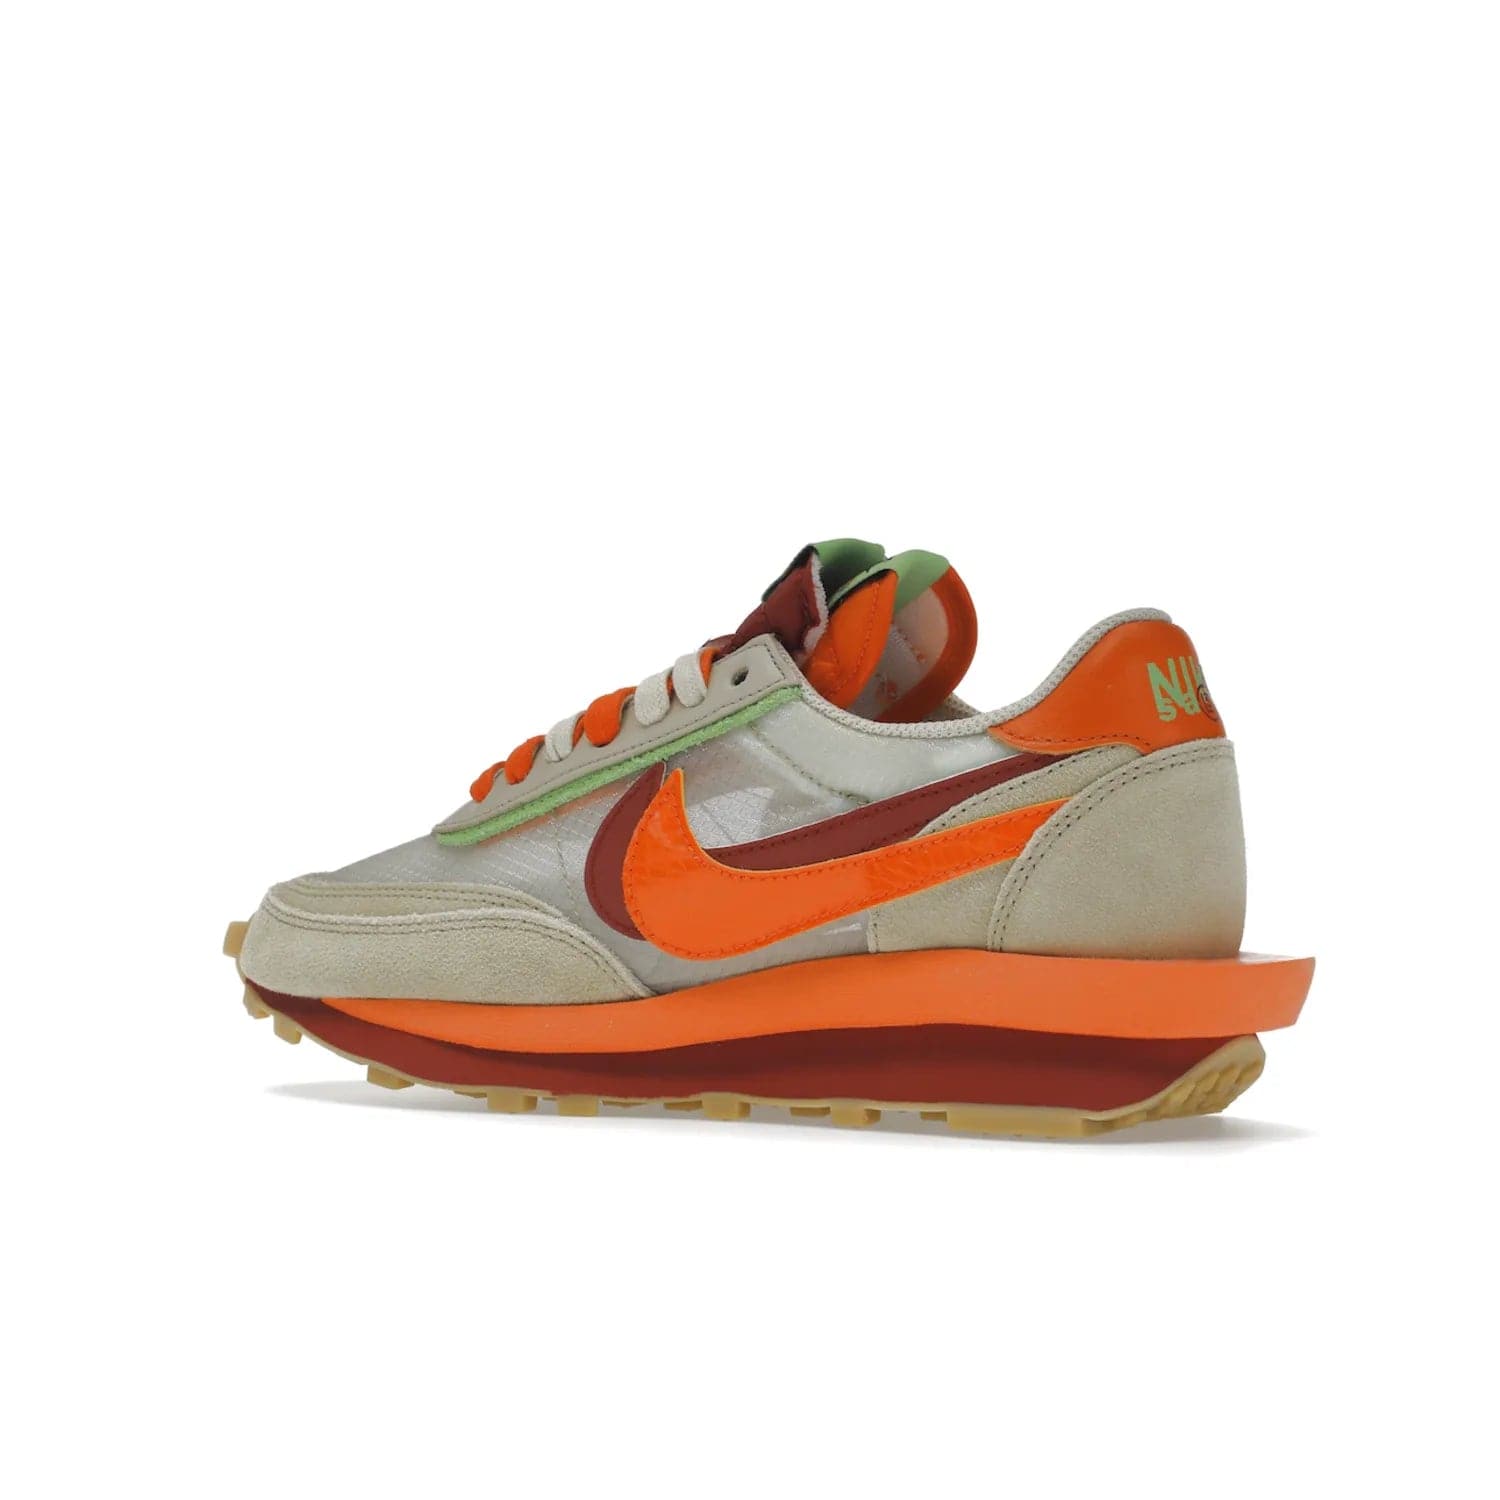 Nike LD Waffle sacai CLOT Kiss of Death Net Orange Blaze - Image 22 - Only at www.BallersClubKickz.com - A bold and stylish Nike LD Waffle sacai CLOT Kiss of Death Net Orange Blaze sneaker featuring a unique off-white, Deep Red & Orange Blaze Swooshes, two-toned stacked sole and doubled tongue. Available in September 2021. Make a statement.